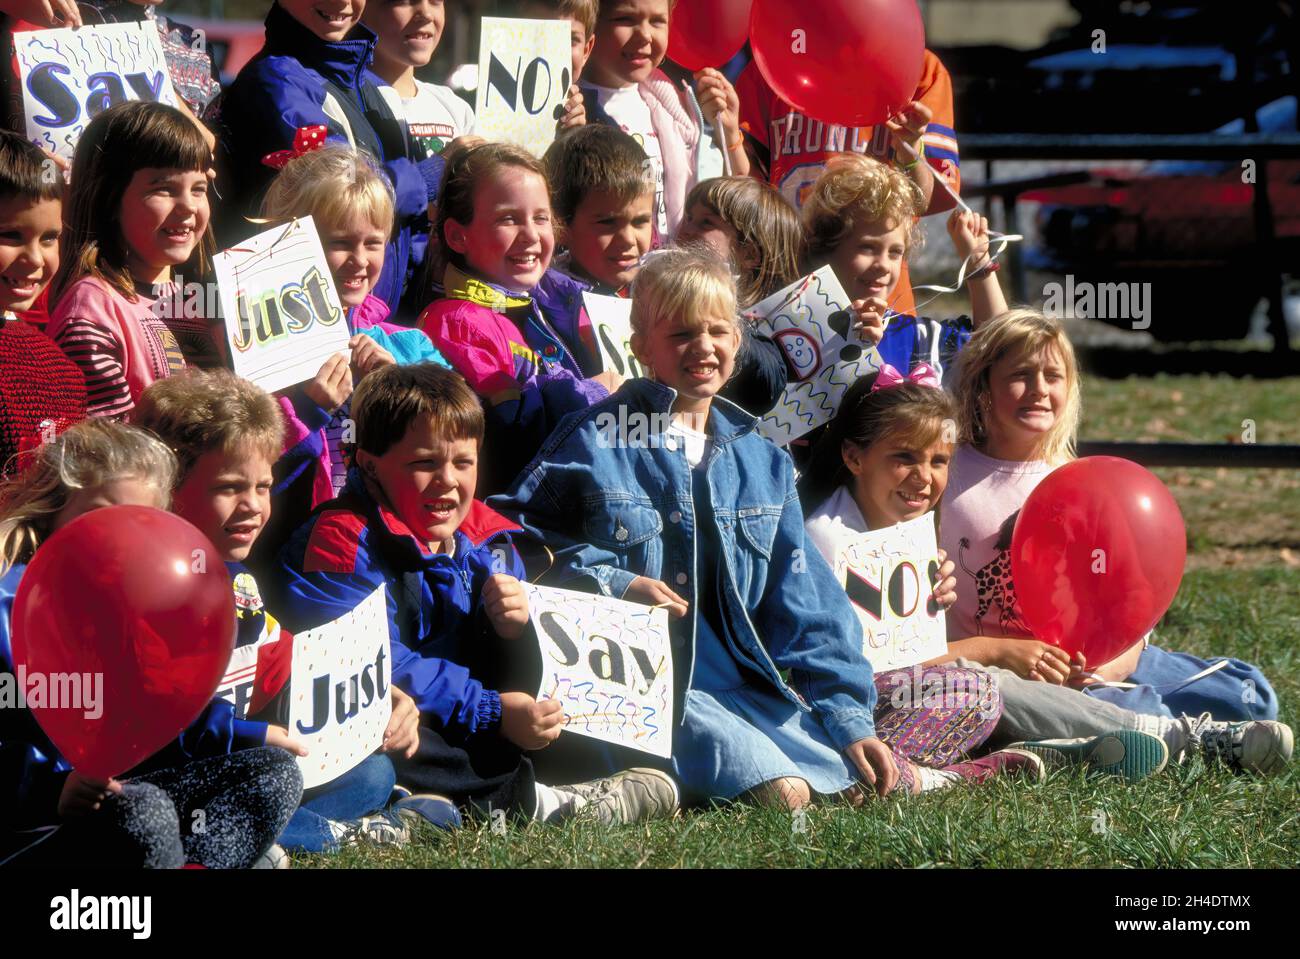 Elementary school children hold signs saying, 'Just Say No' as part of a nationwide anti-drug campaign in the 1980s started by Nancy Reagan. Stock Photo